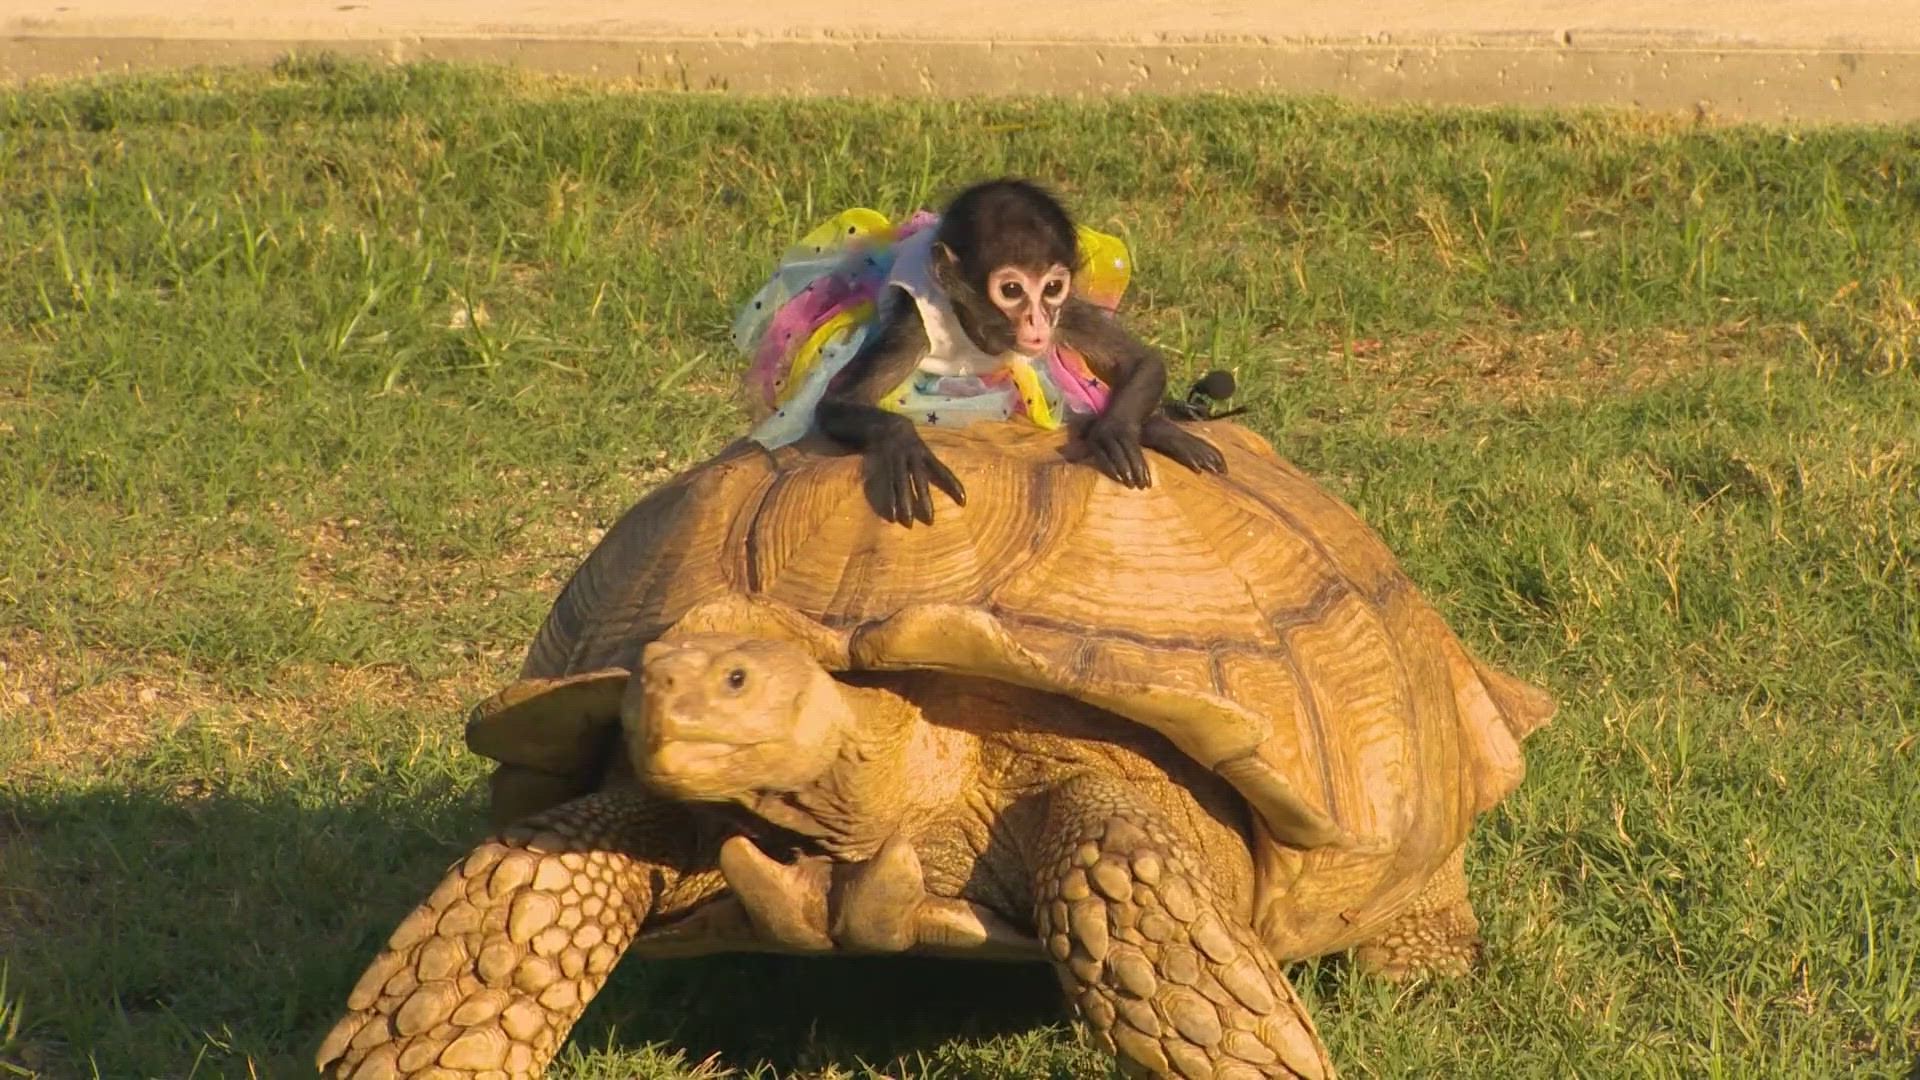 More than 20 people believed the tortoise was theirs.